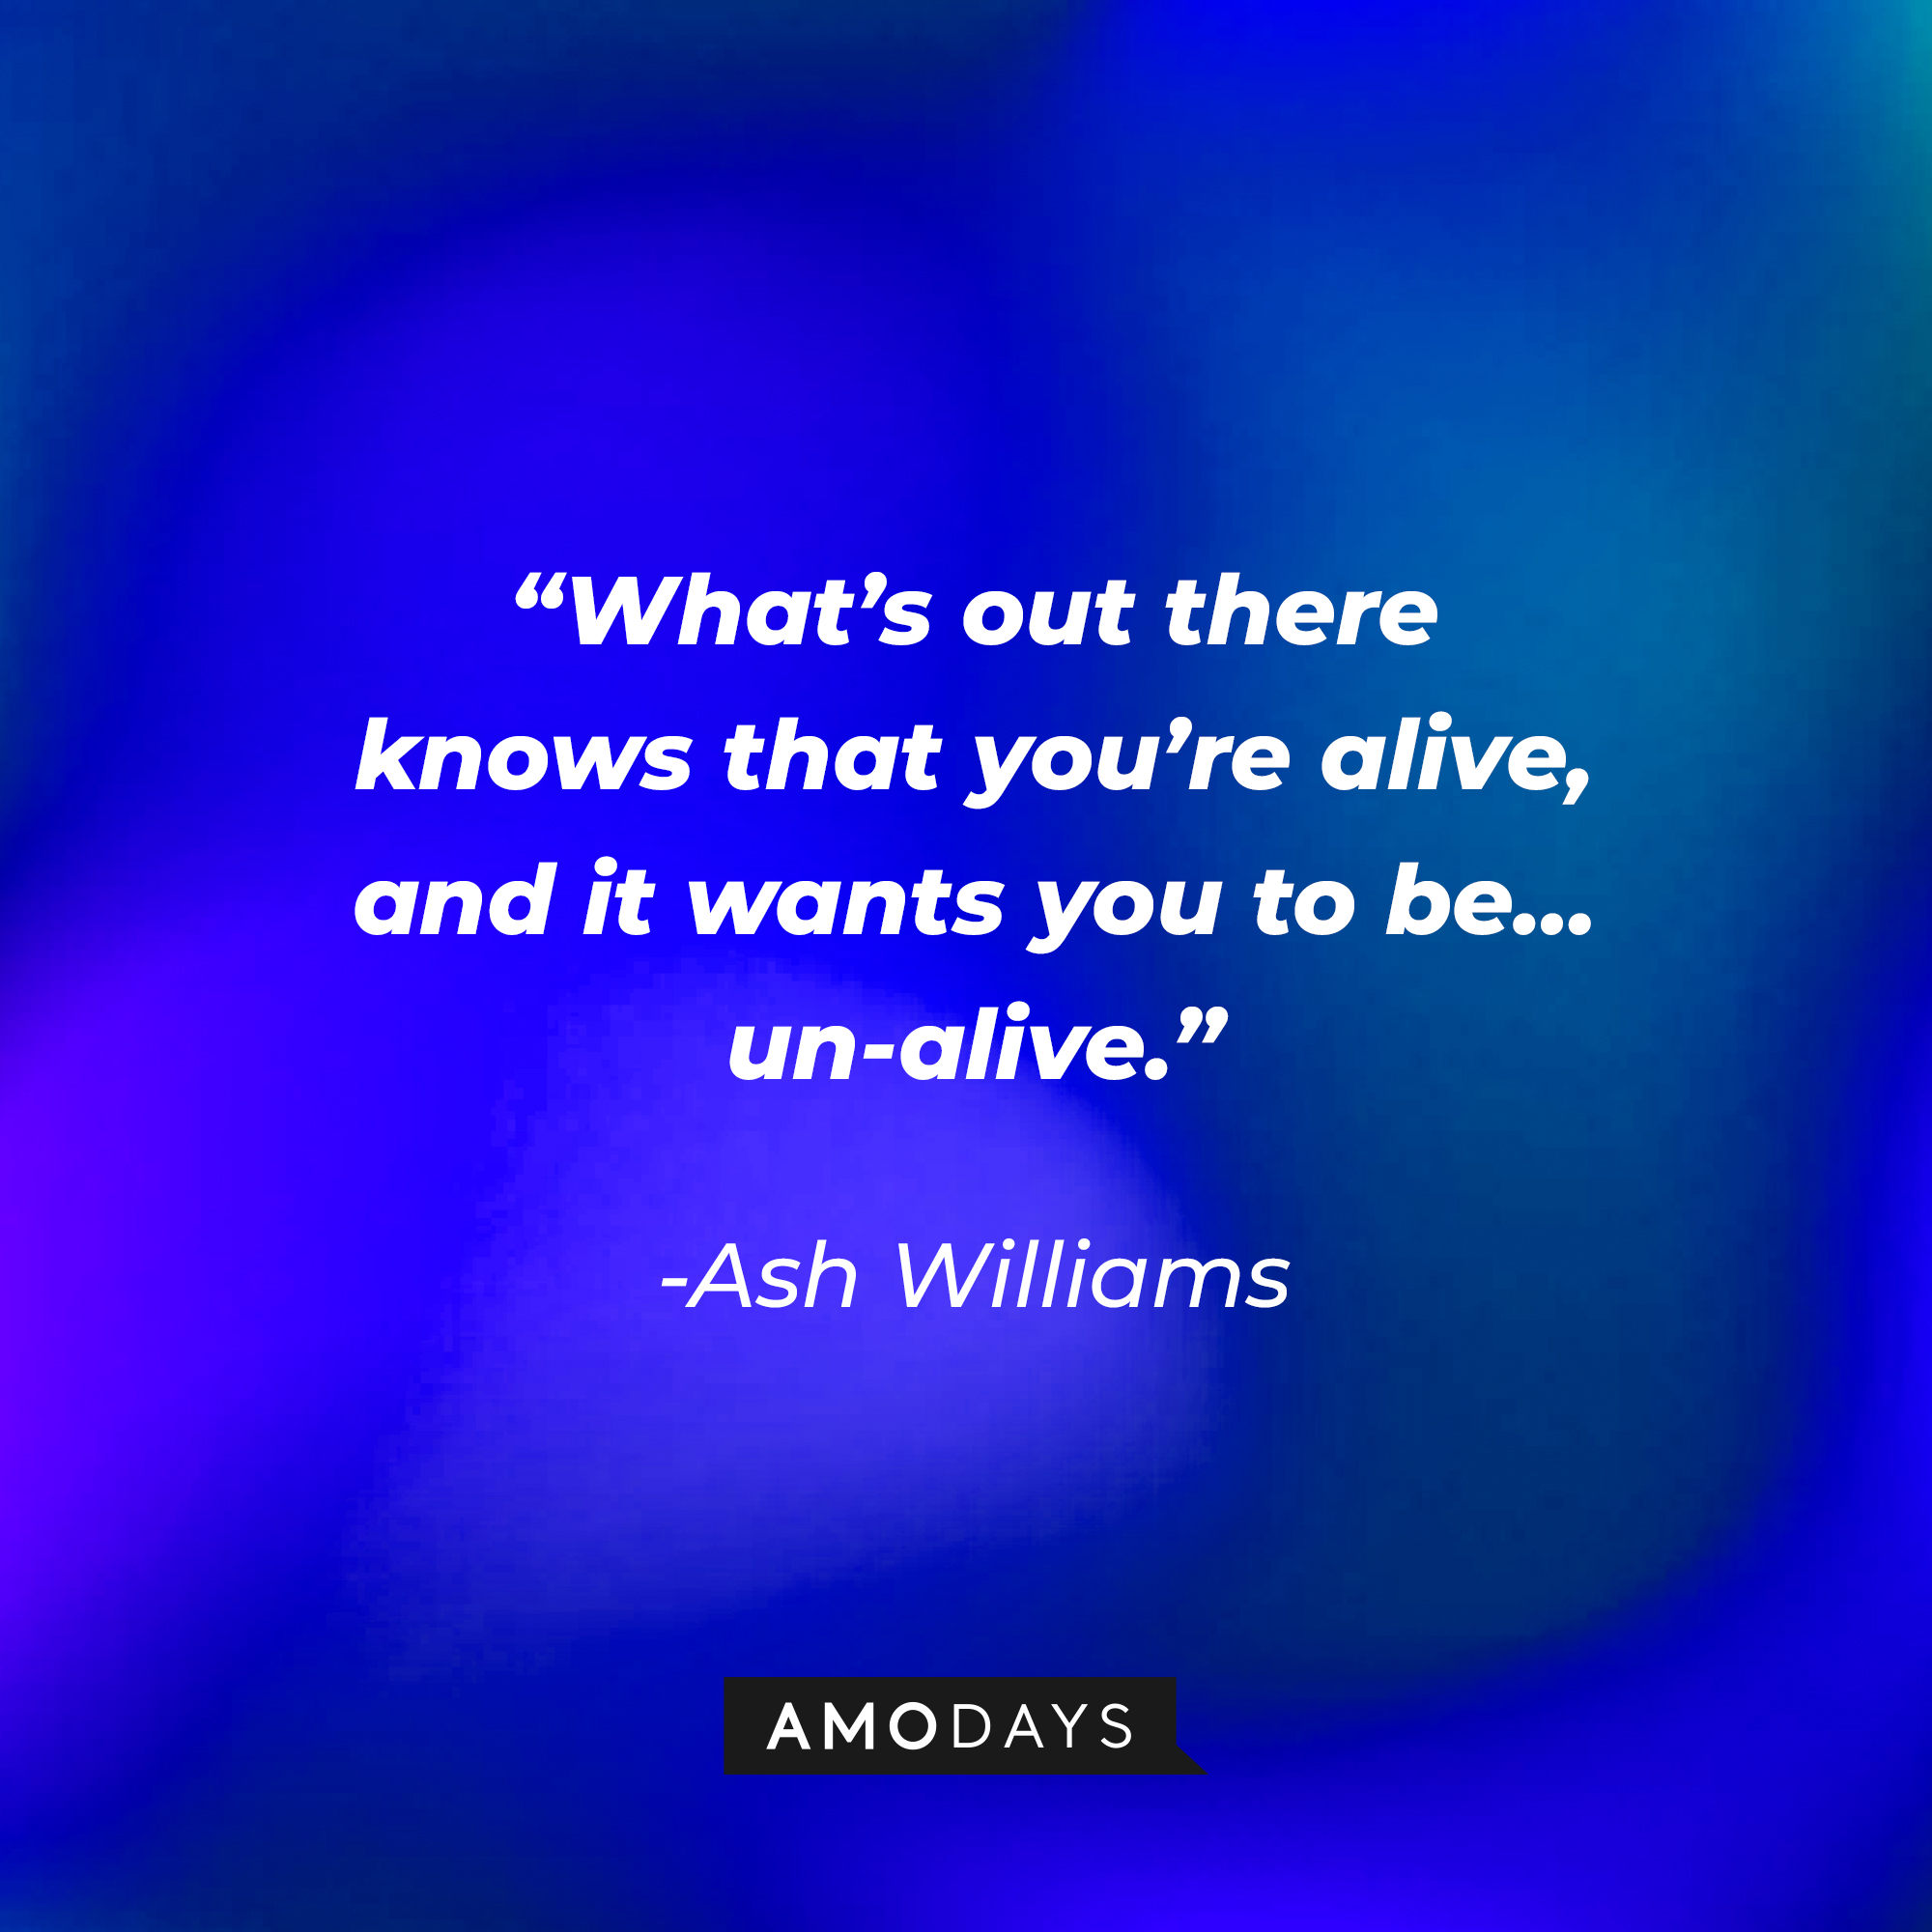 Ash Williams' quote:  “What’s out there knows that you’re alive, and it wants you to be… un-alive.” | Source: Amodays